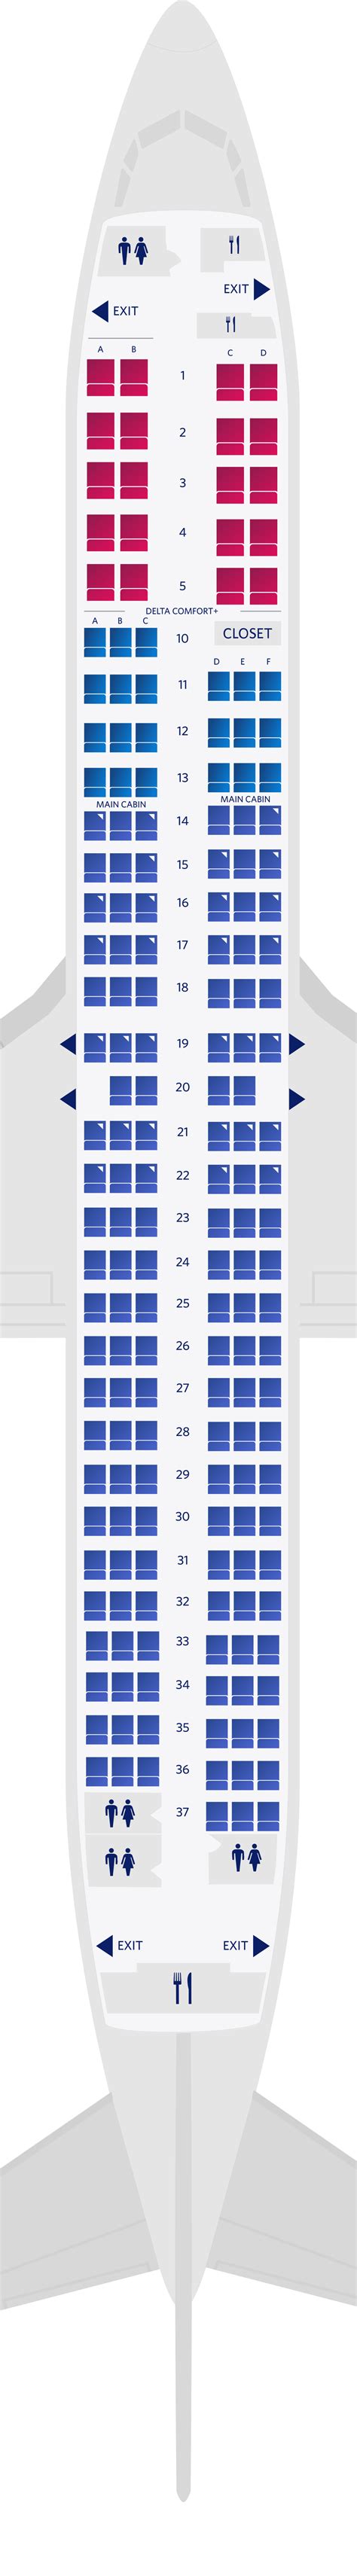 delta boeing 737 900 seating chart